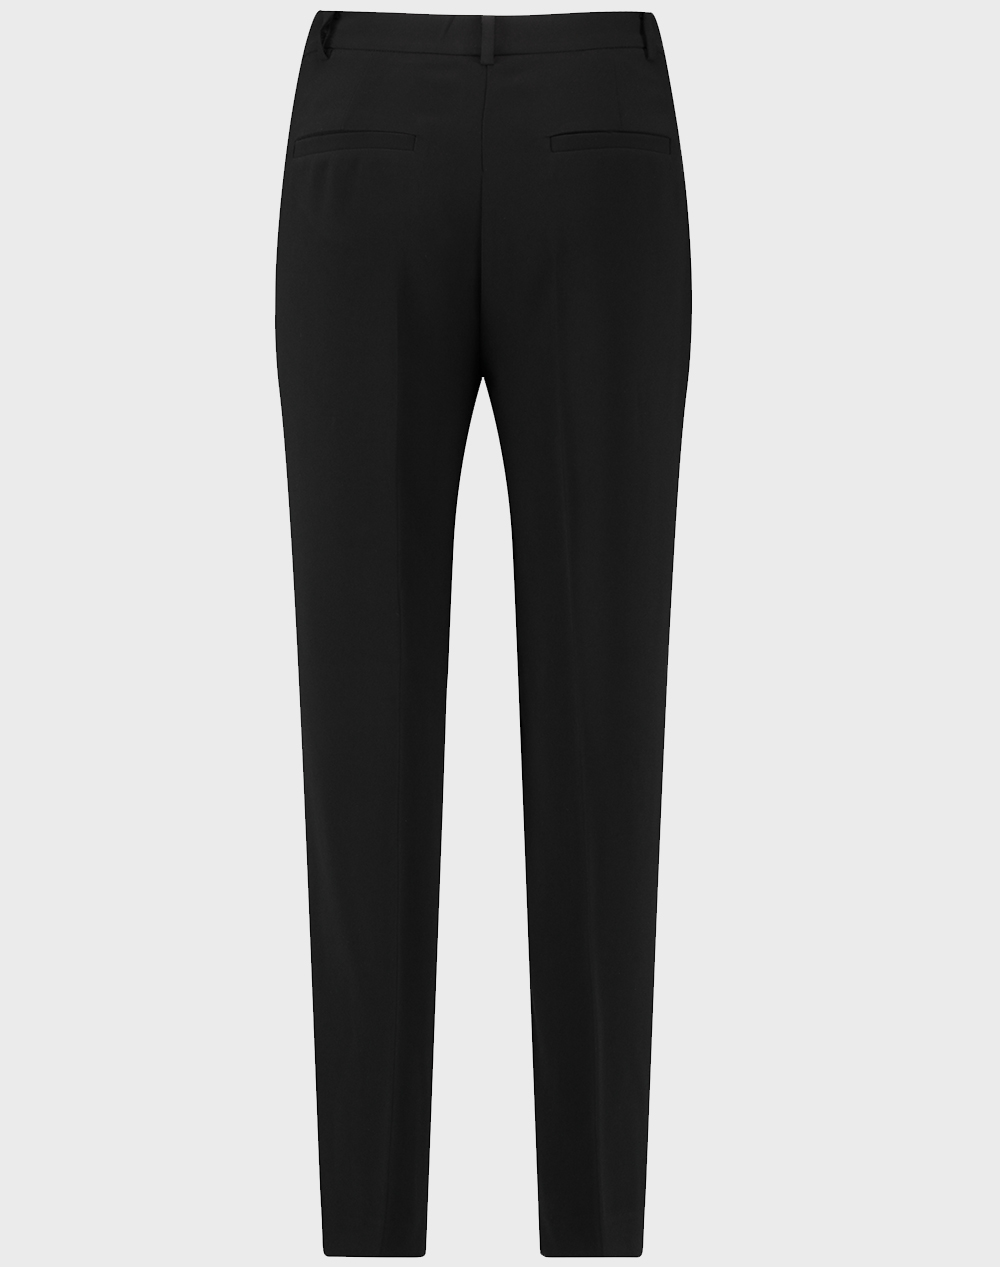 GERRY WEBER CROPPED PANTS